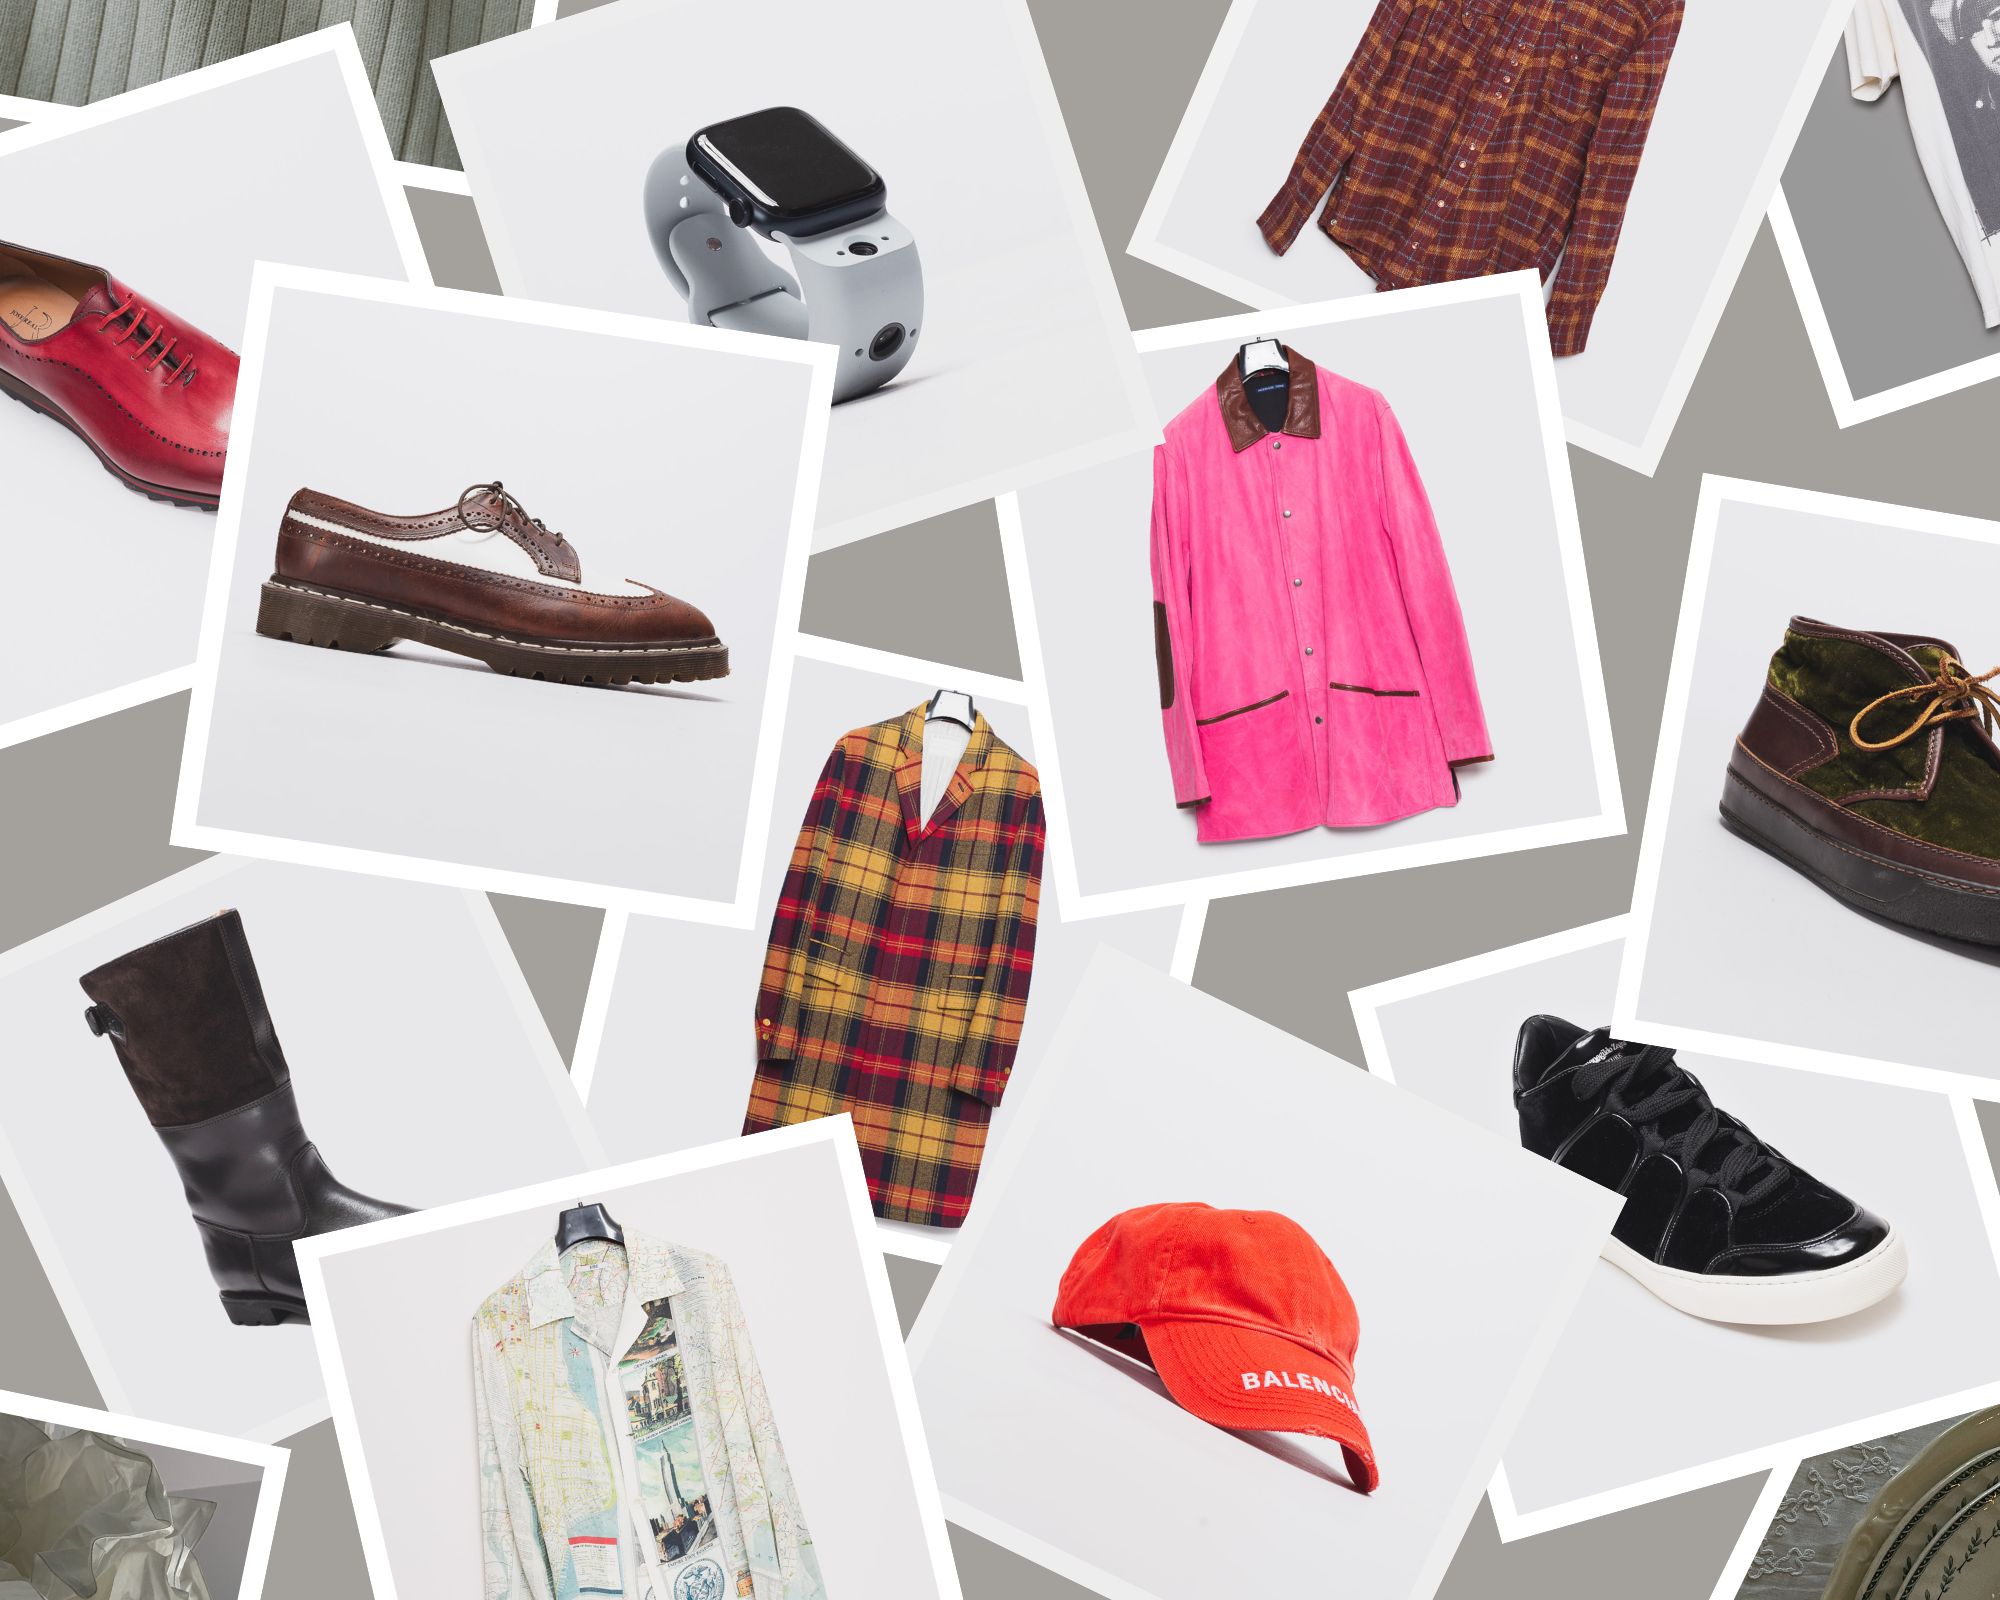 colorful collage of men's fashion items: hats, shoes, coats, shirts